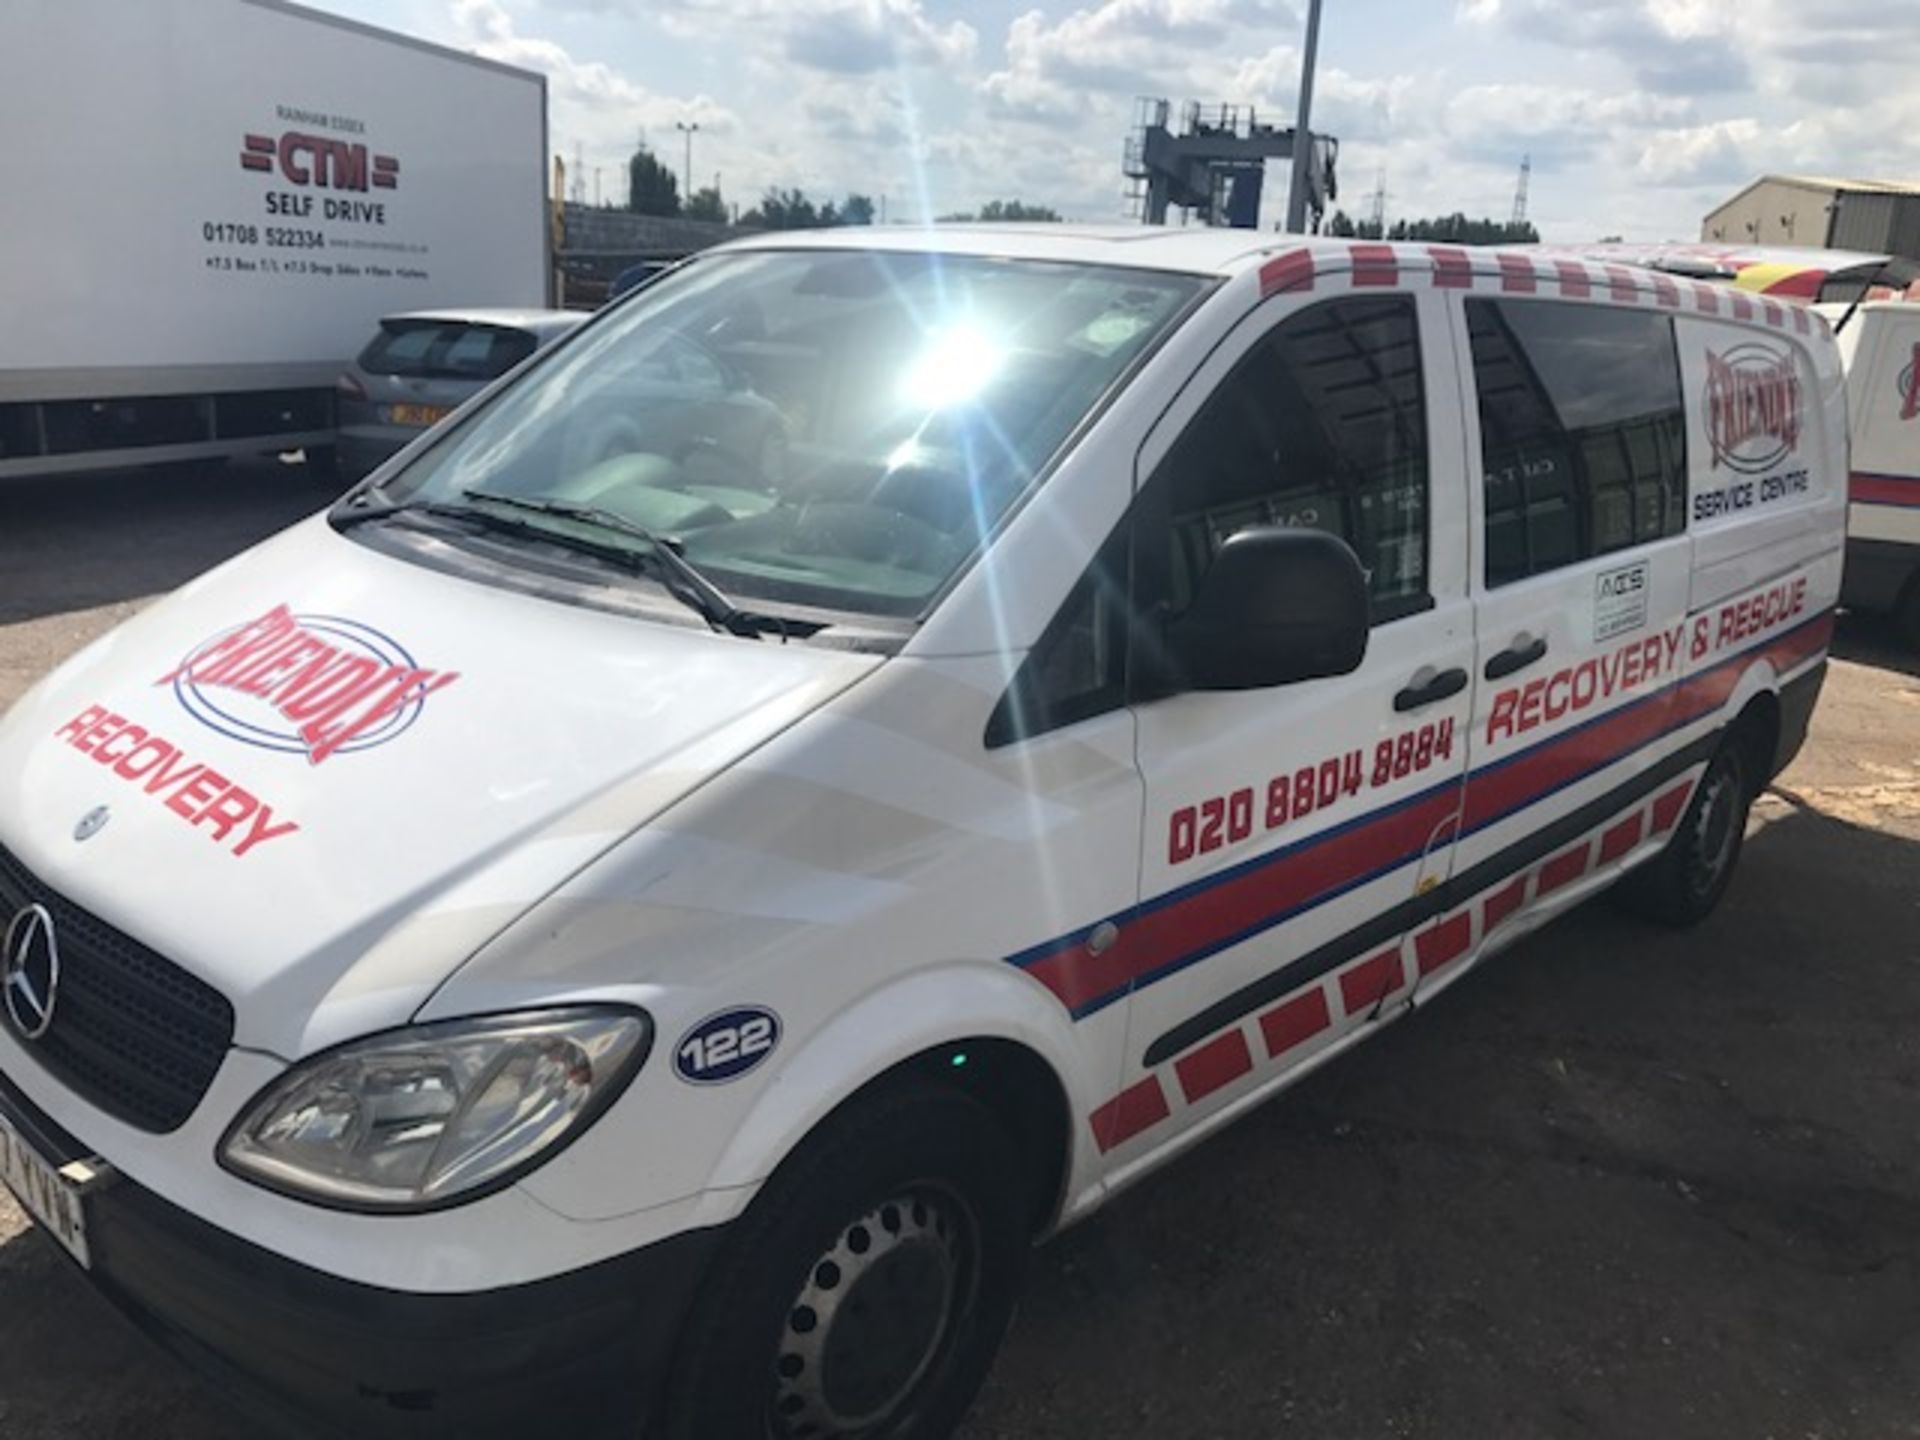 2007 Mercedes Vito crew cab five seater recovery and rescue vehicle complete with Mane LPD Limited - Image 2 of 14